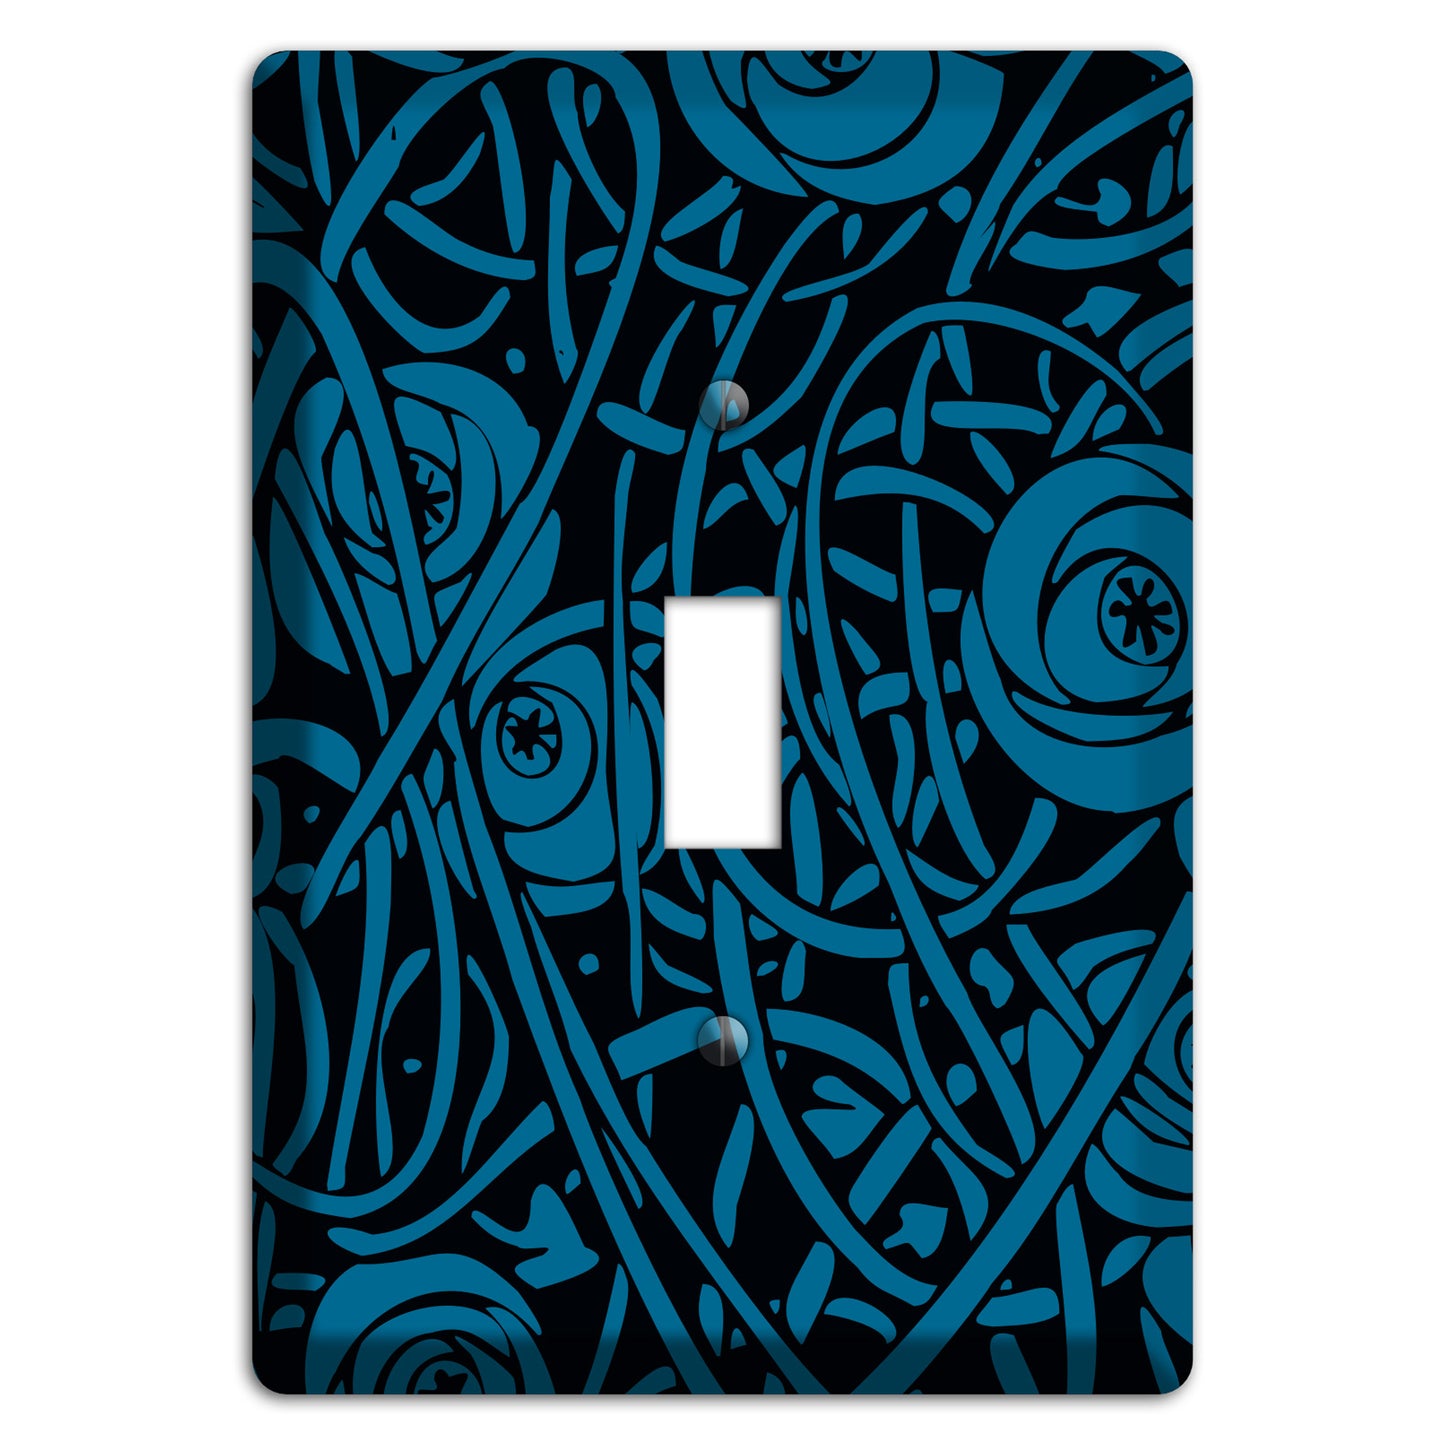 Black and Blue Deco Floral Cover Plates